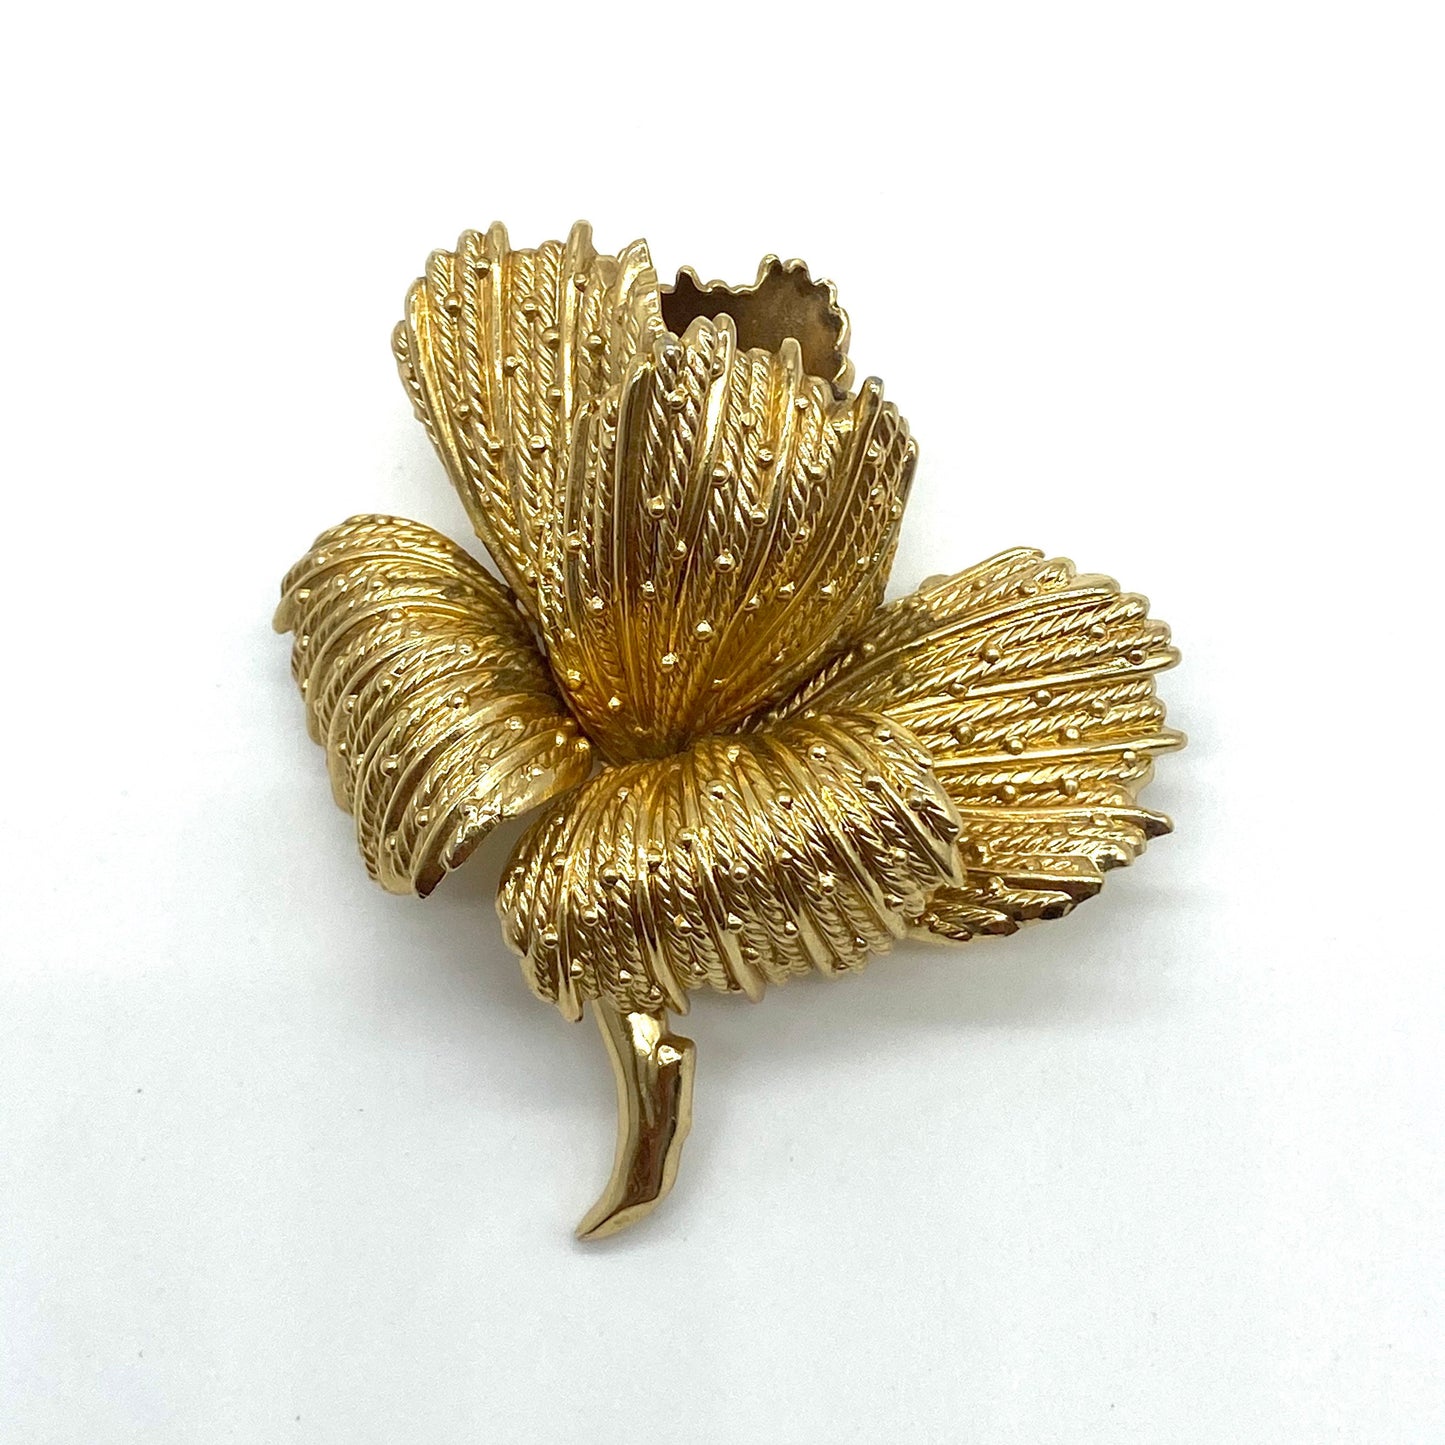 RARE Grossé 1966 Germany Gold Plated Flower Brooch